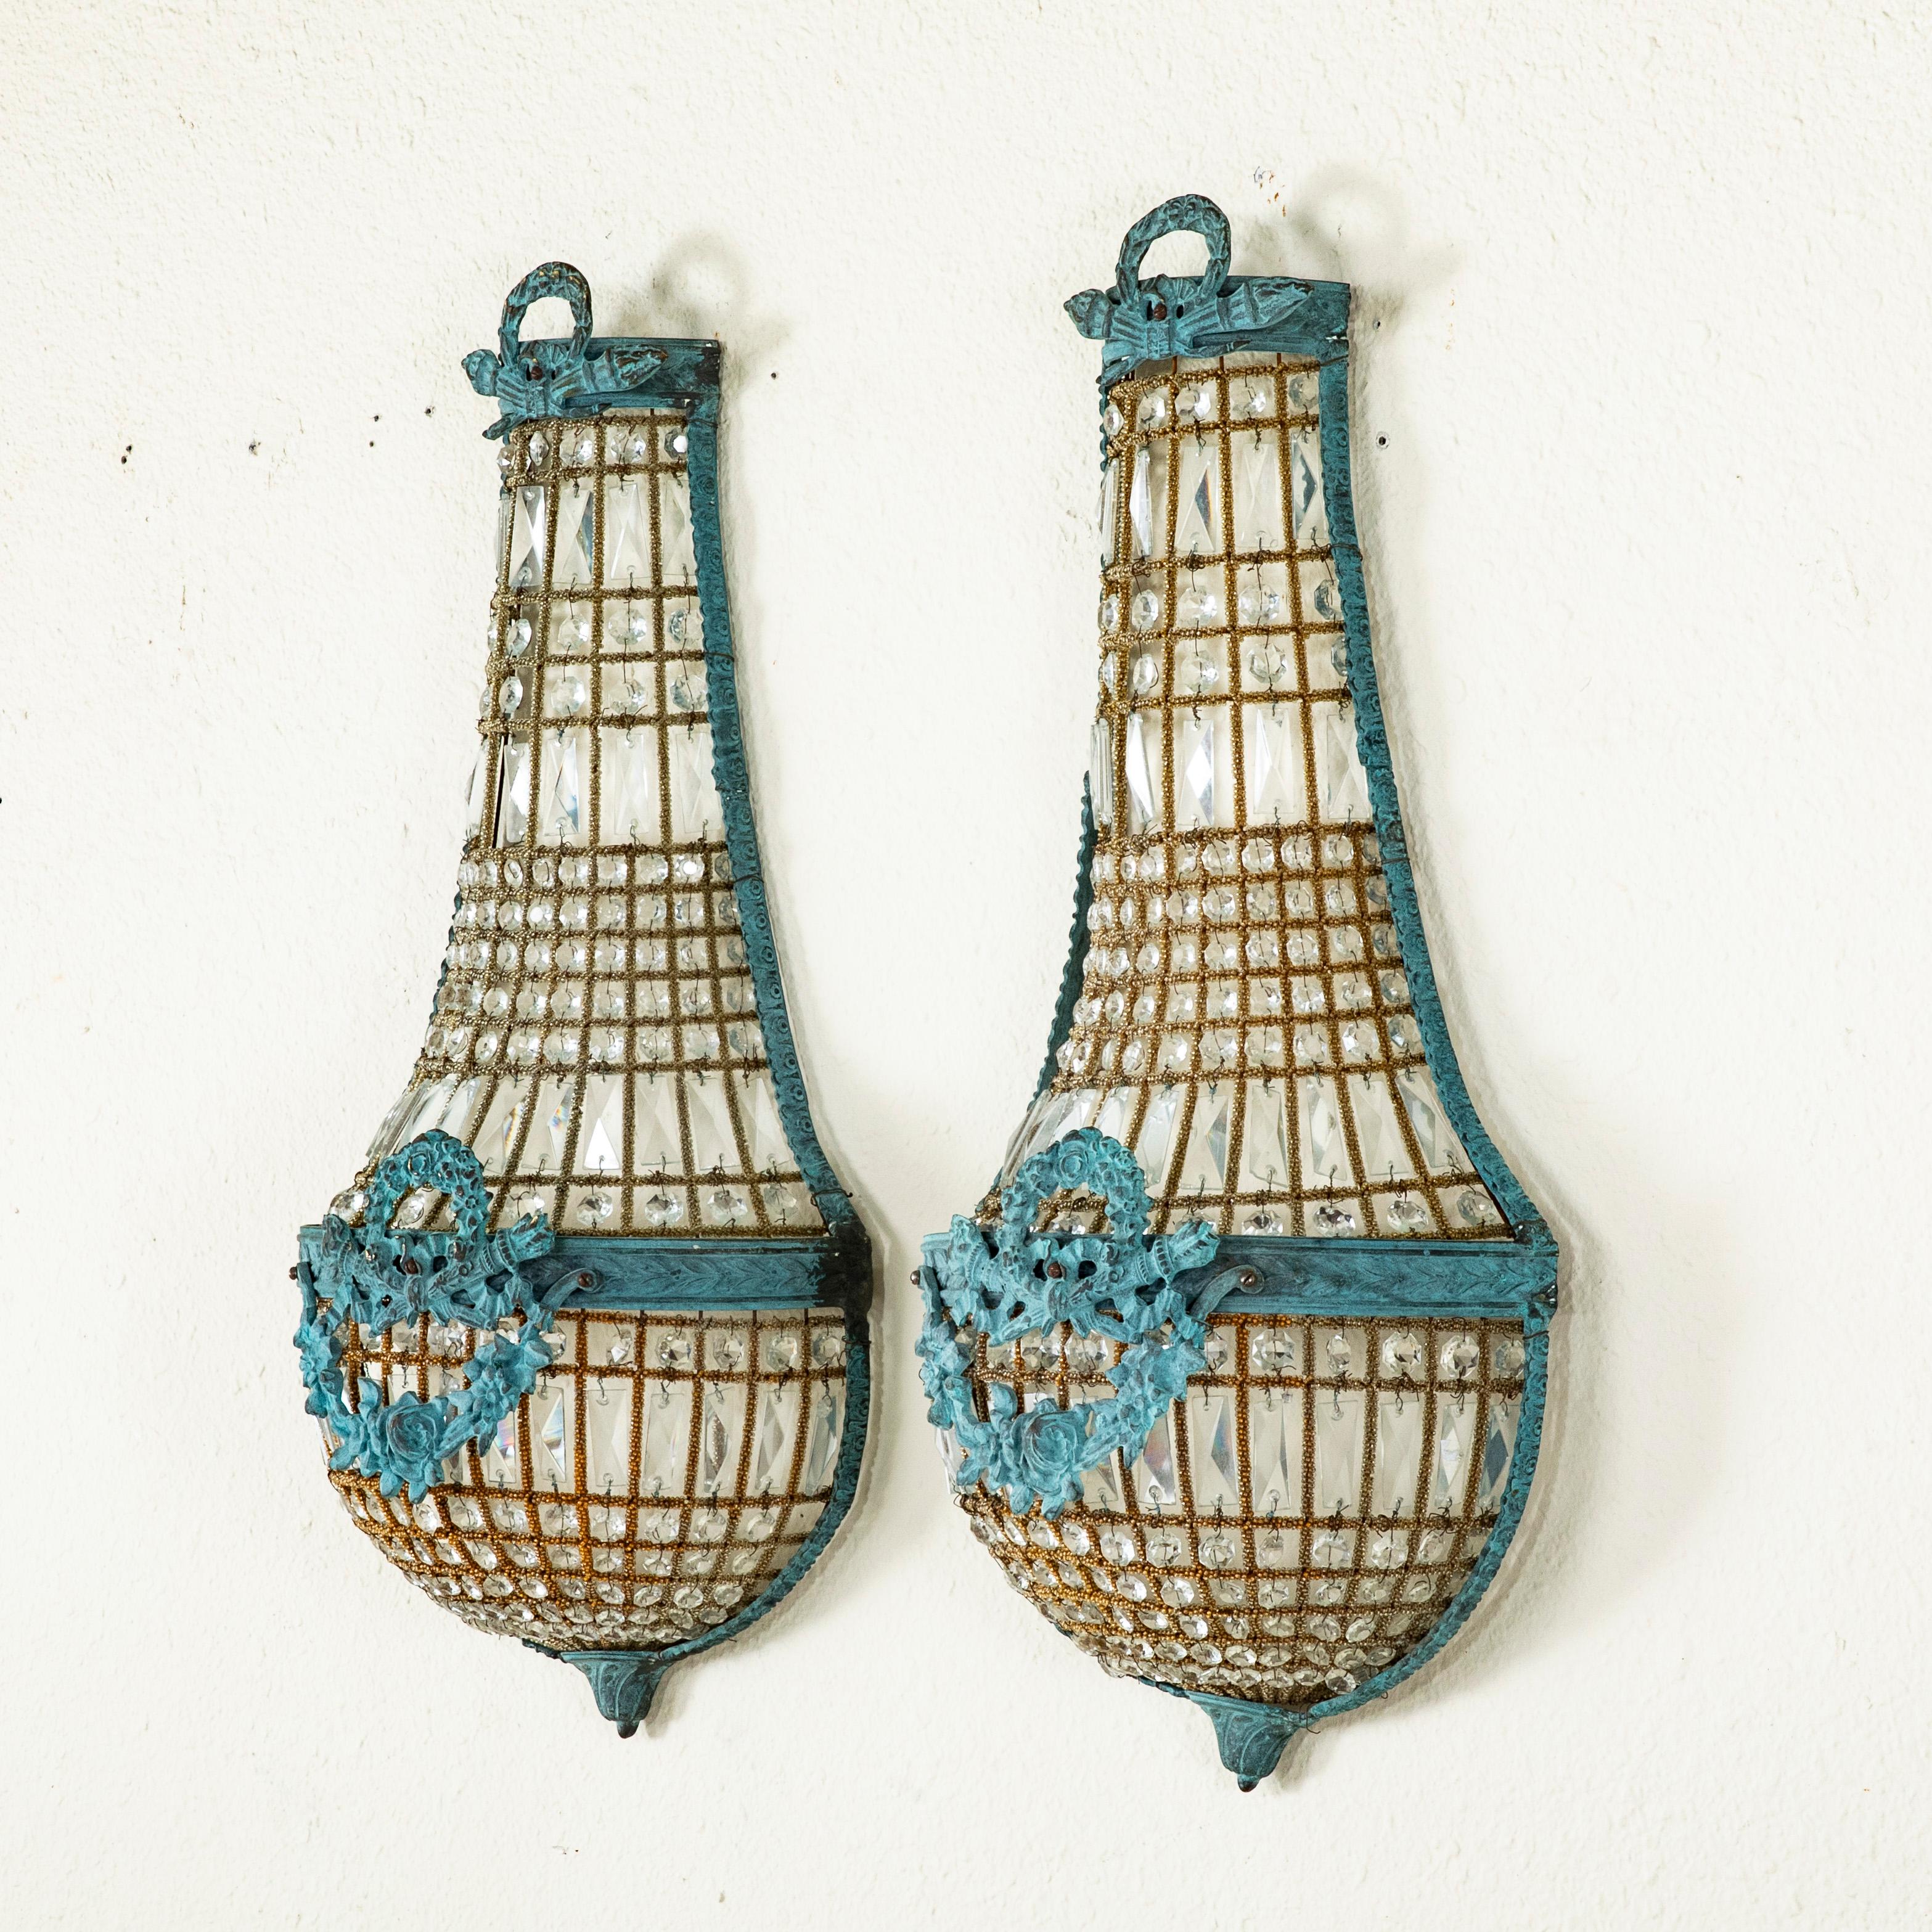 This pair of mid-century French Louis XVI style patinated metal sconces take the form of upside down hot air balloons and are detailed with beading and multi-faceted strings of glass beads. The sconces are finished with Classic Louis XVI crossed